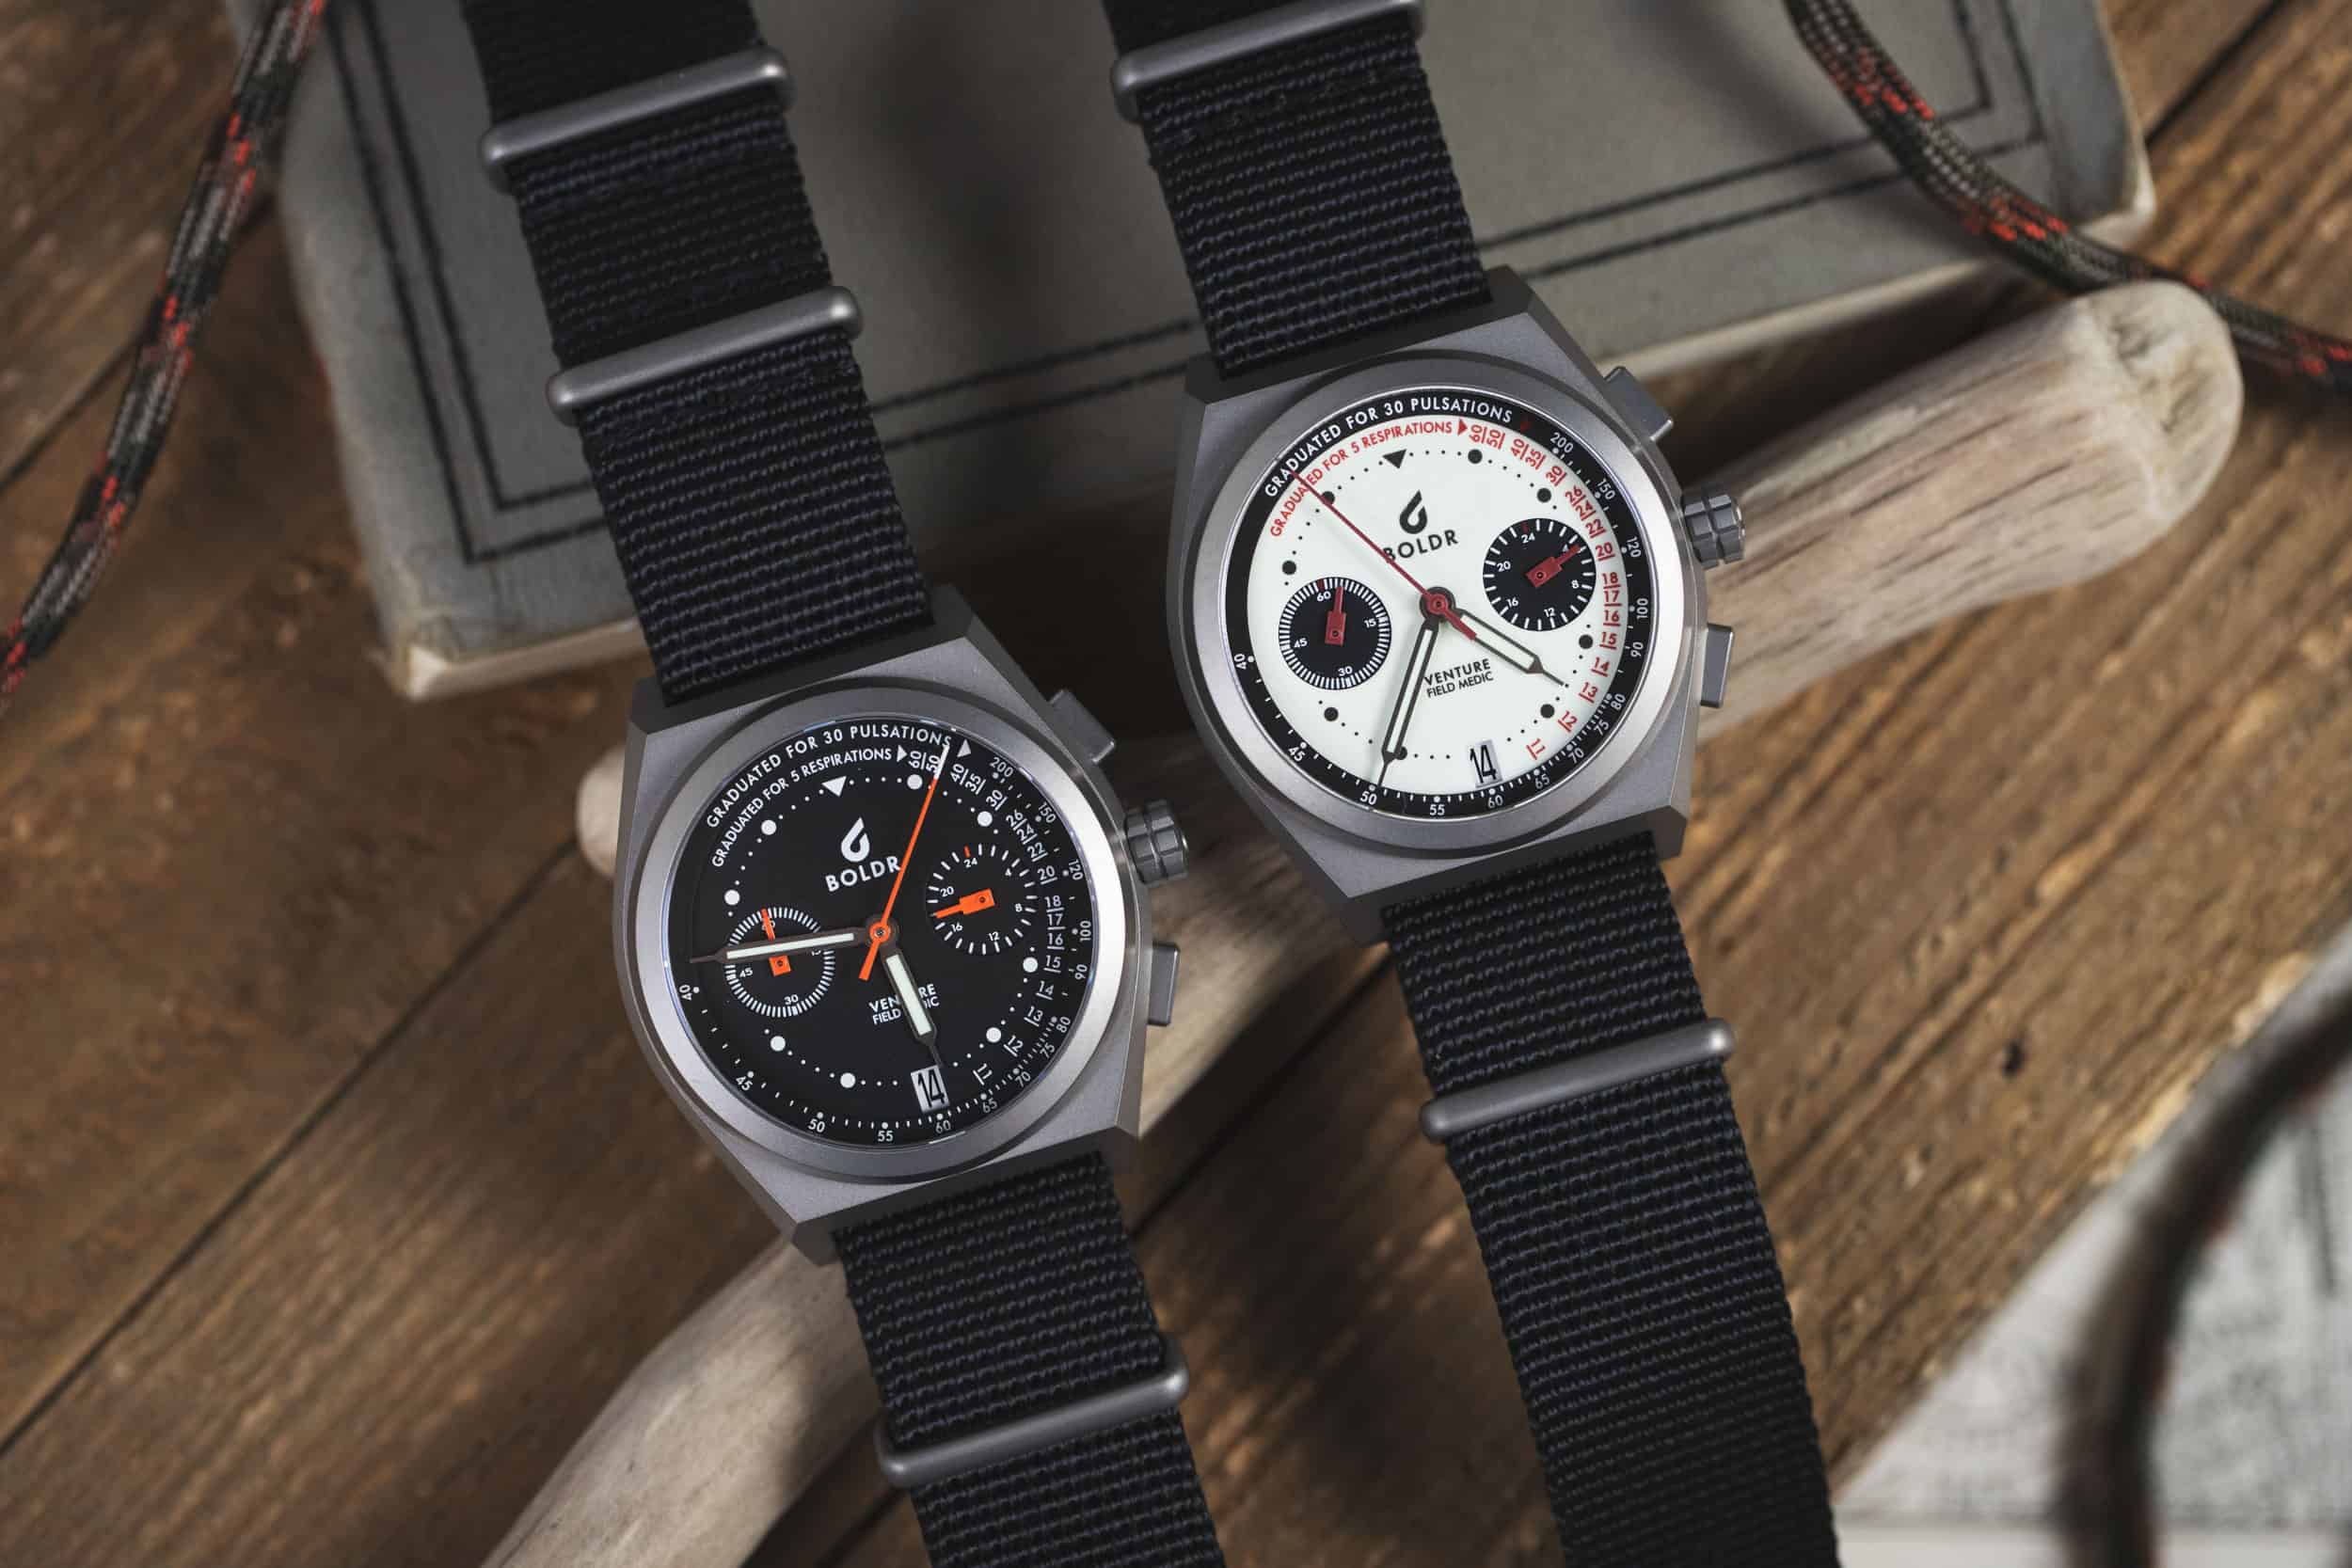 Introducing the Boldr Field Medic Chronographs – Now Available at the Windup Watch Shop